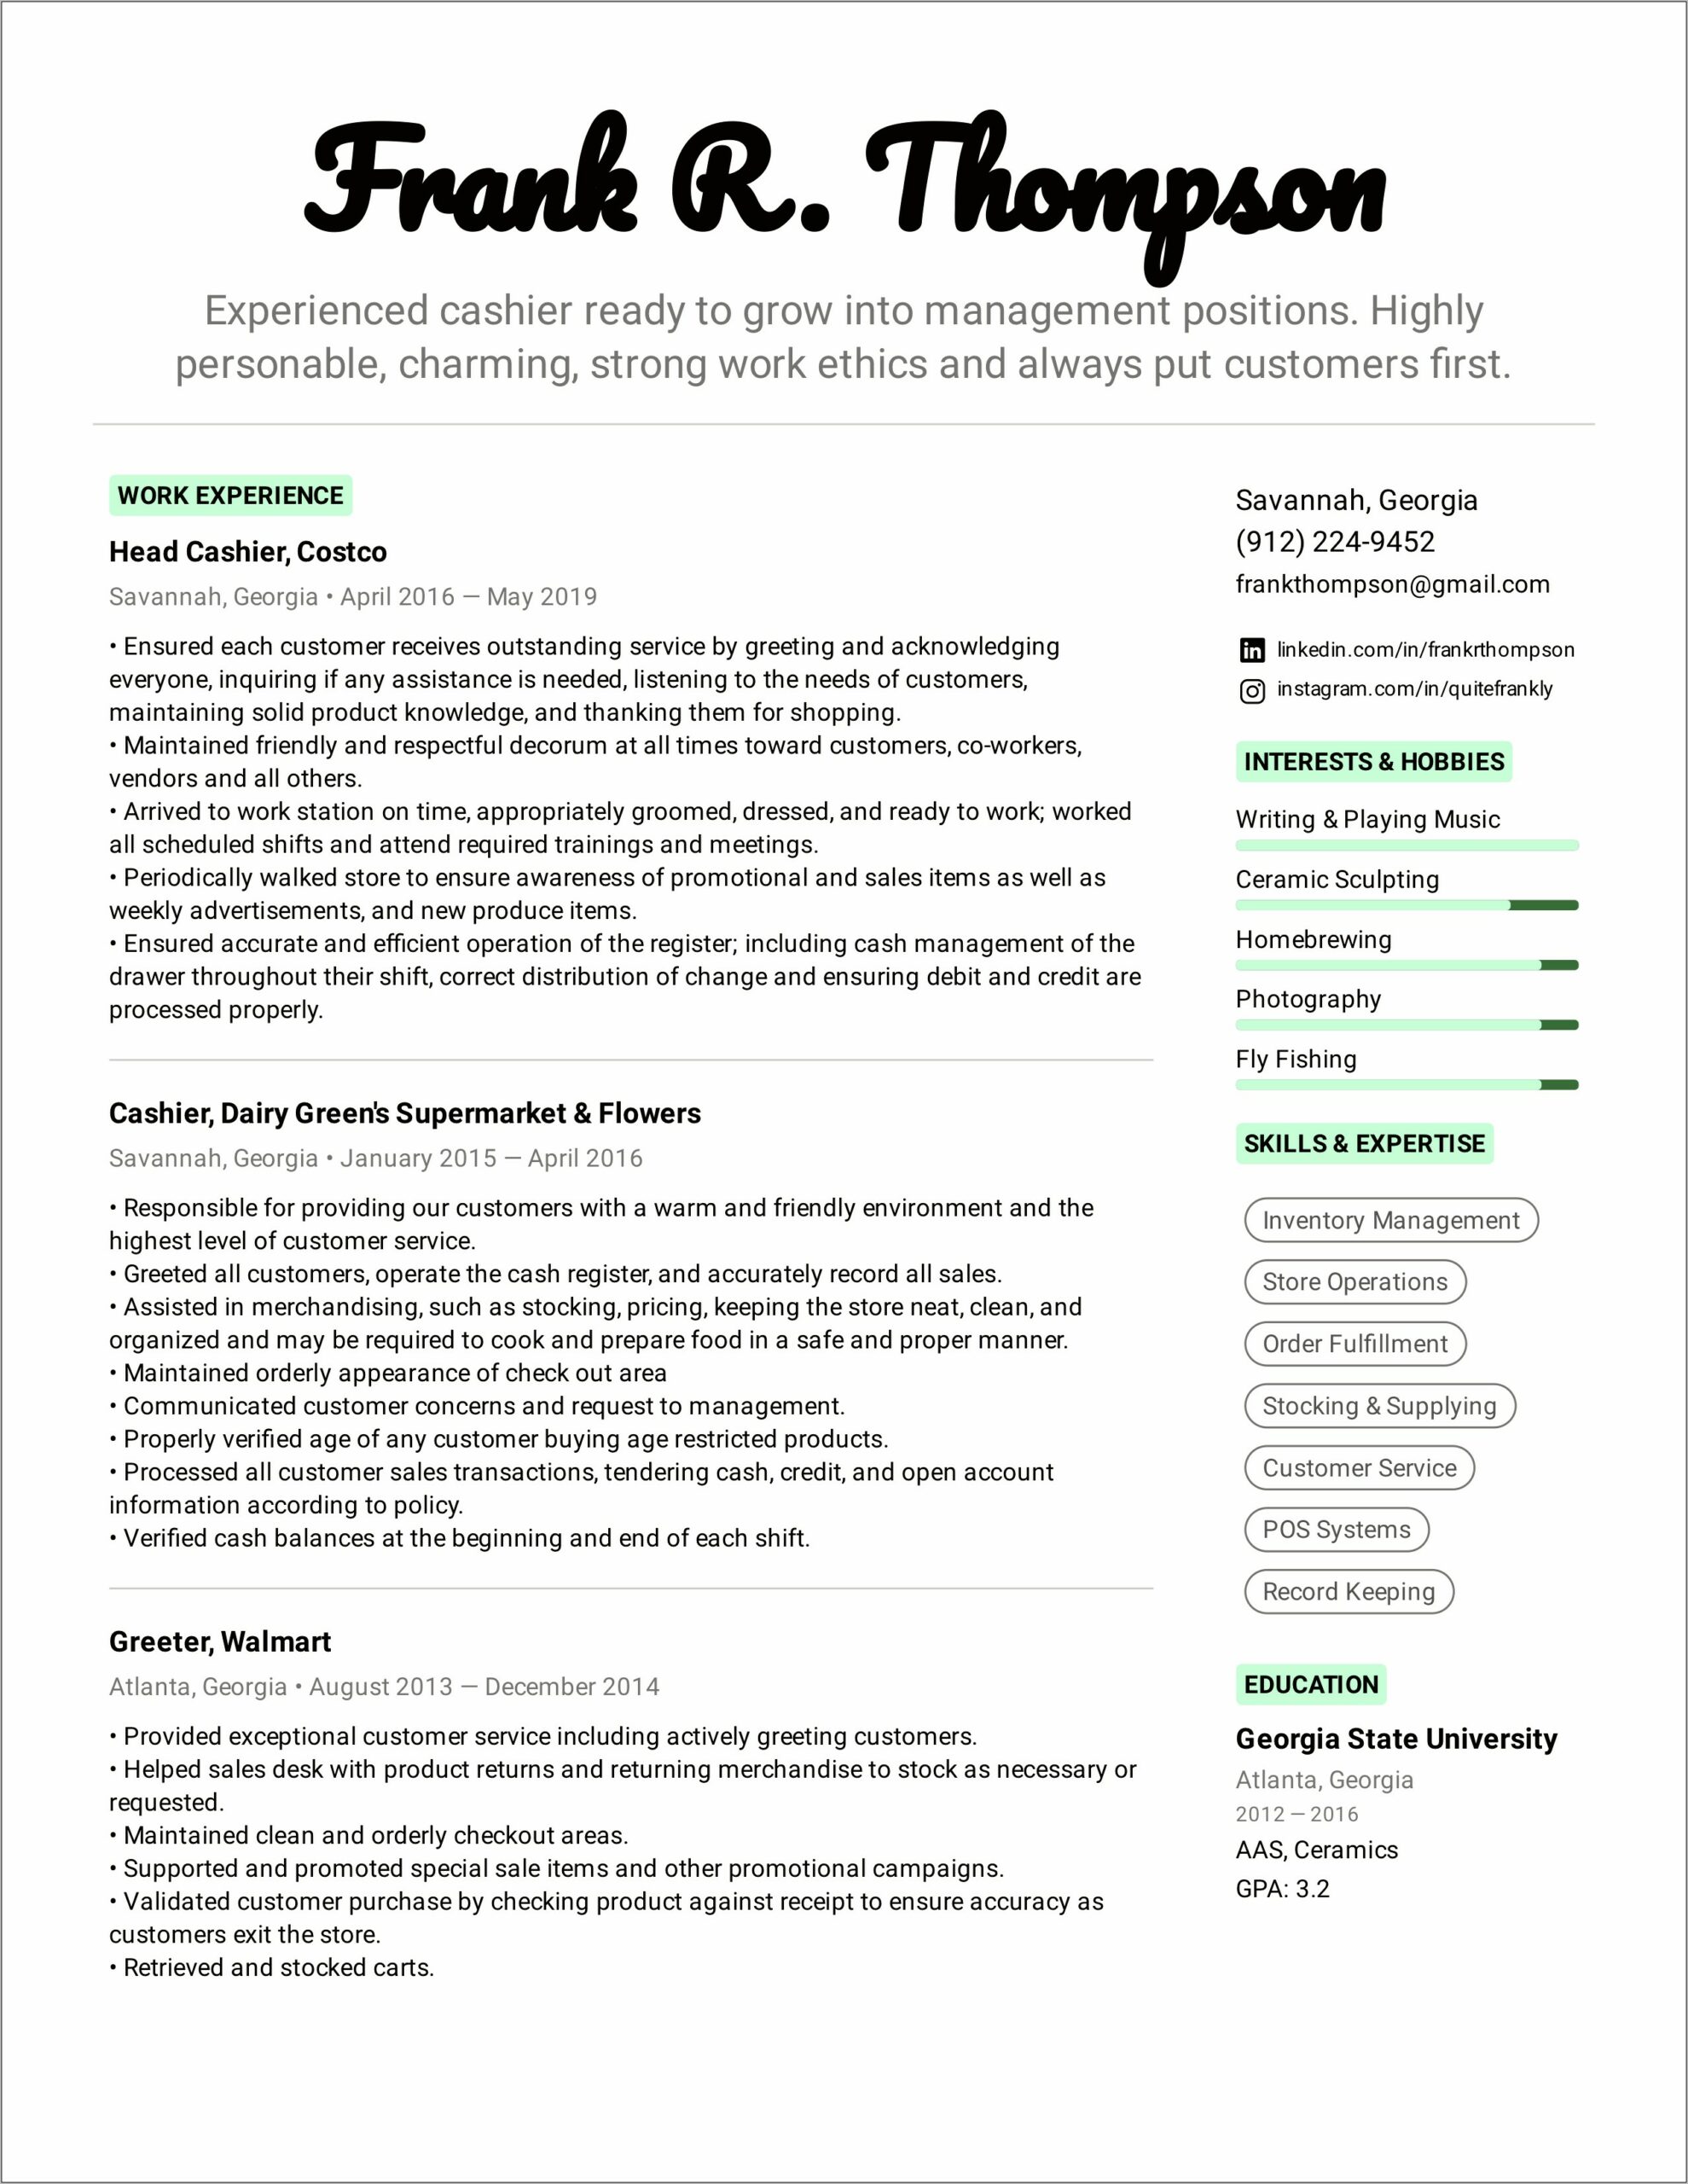 Example Resume For Cashier Objectives